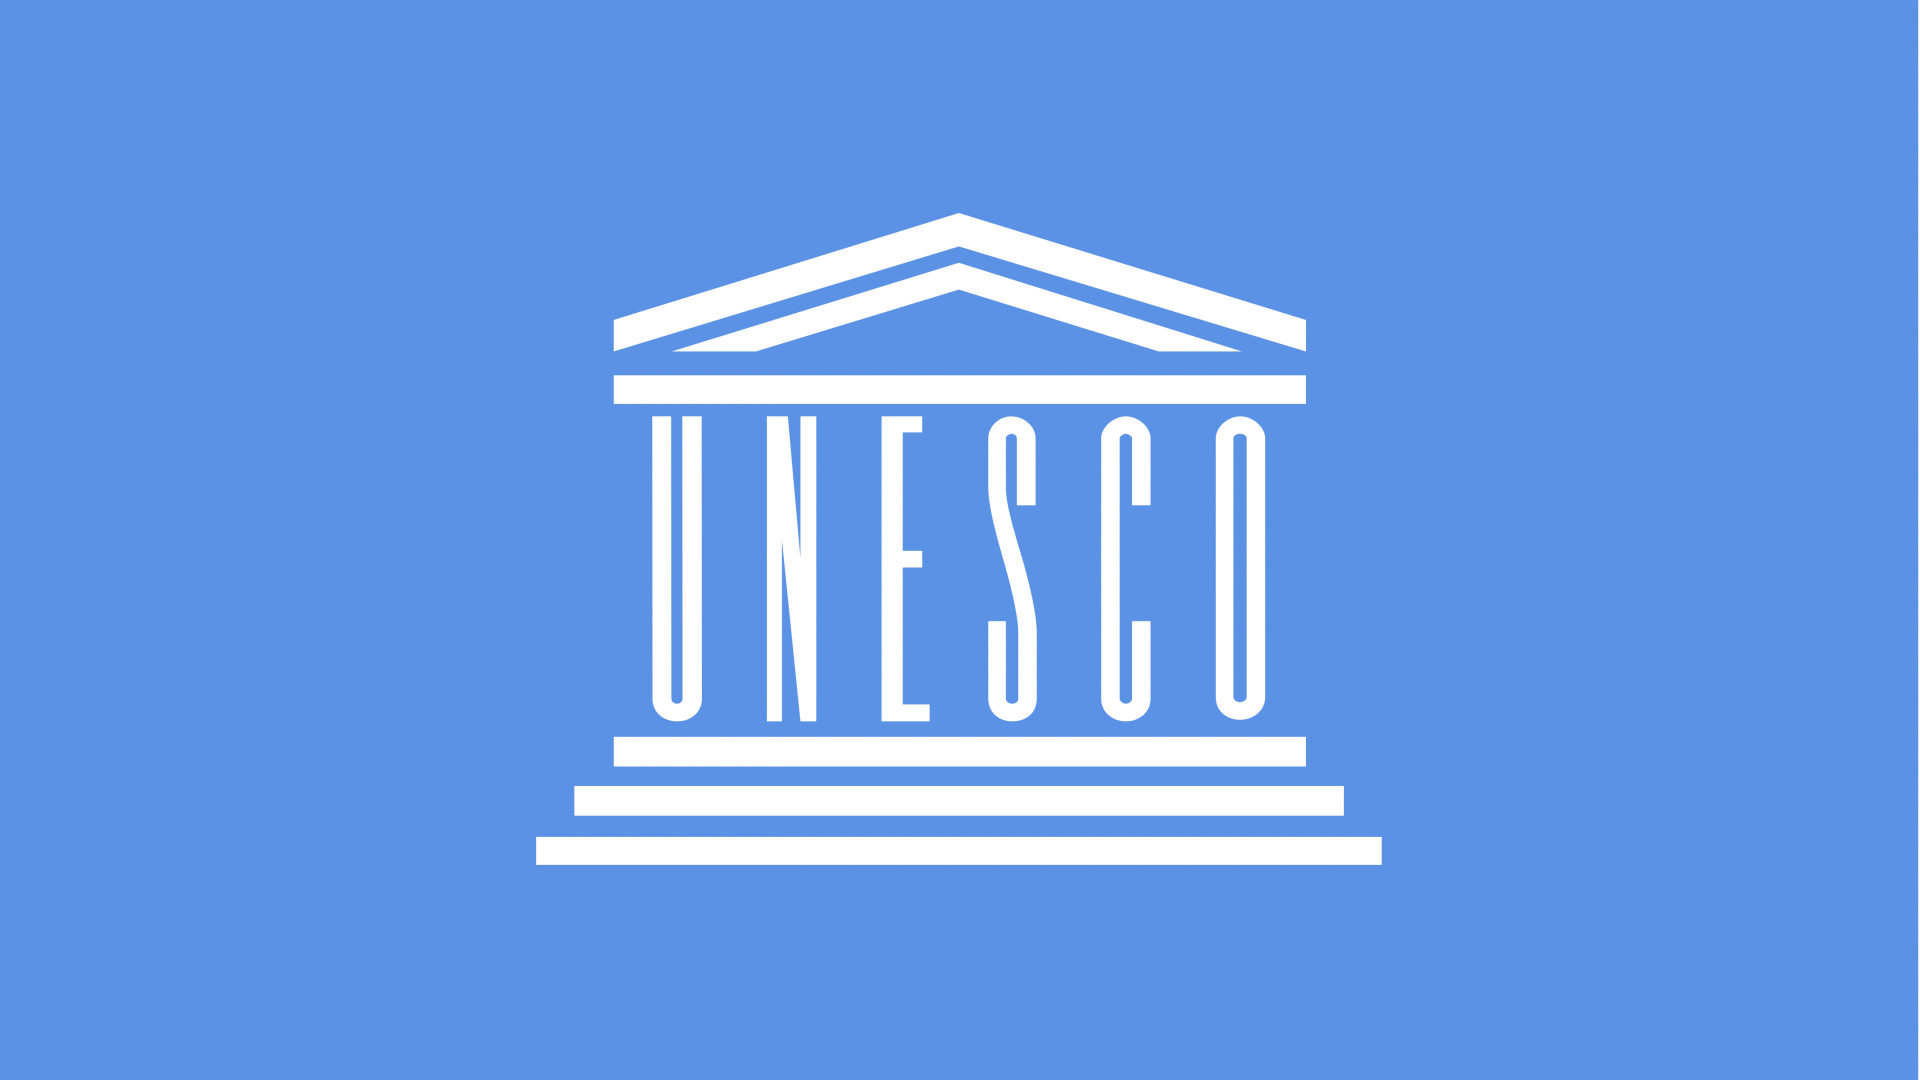 UNESCO’s Special Remark “Global Challenges and Unesco’s Soft Power Vision”